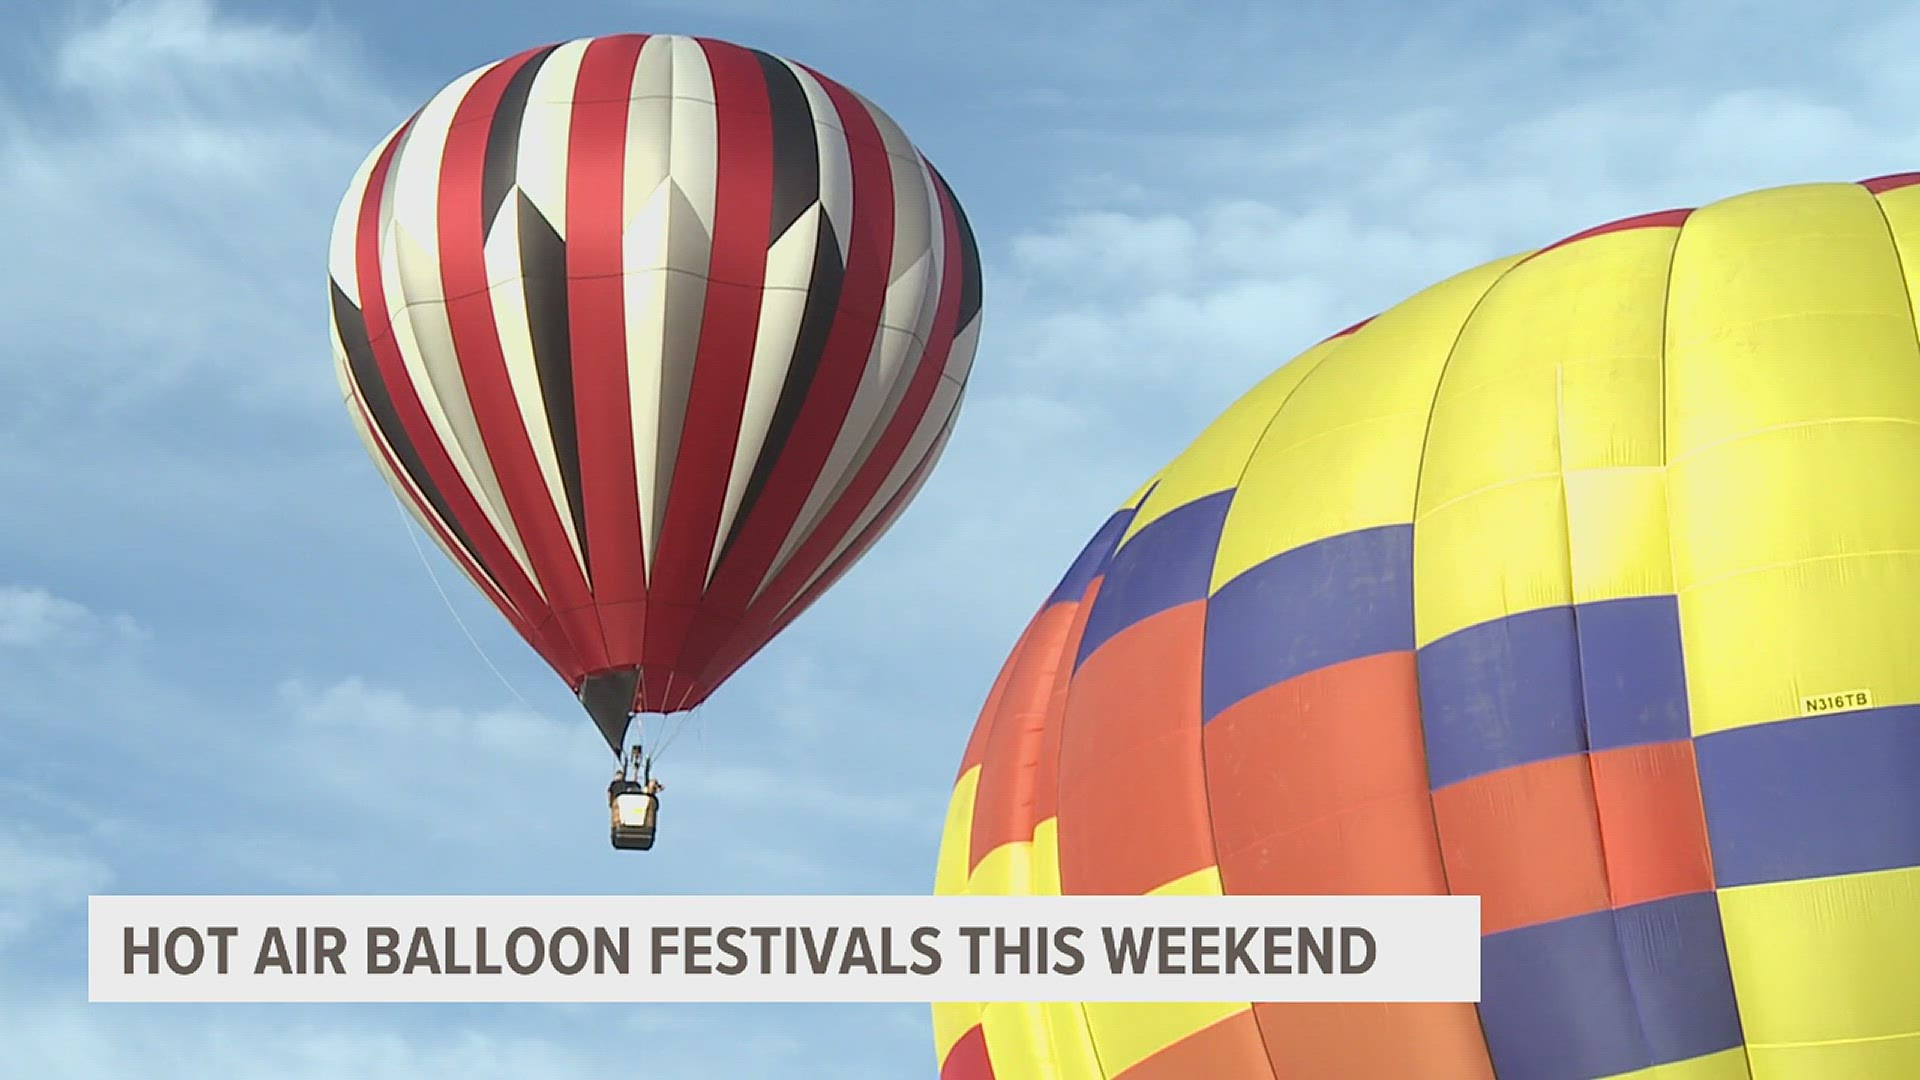 There are many family-friendly events going on this weekend, and we've brought in Dani Howe from WLLR to break it down.